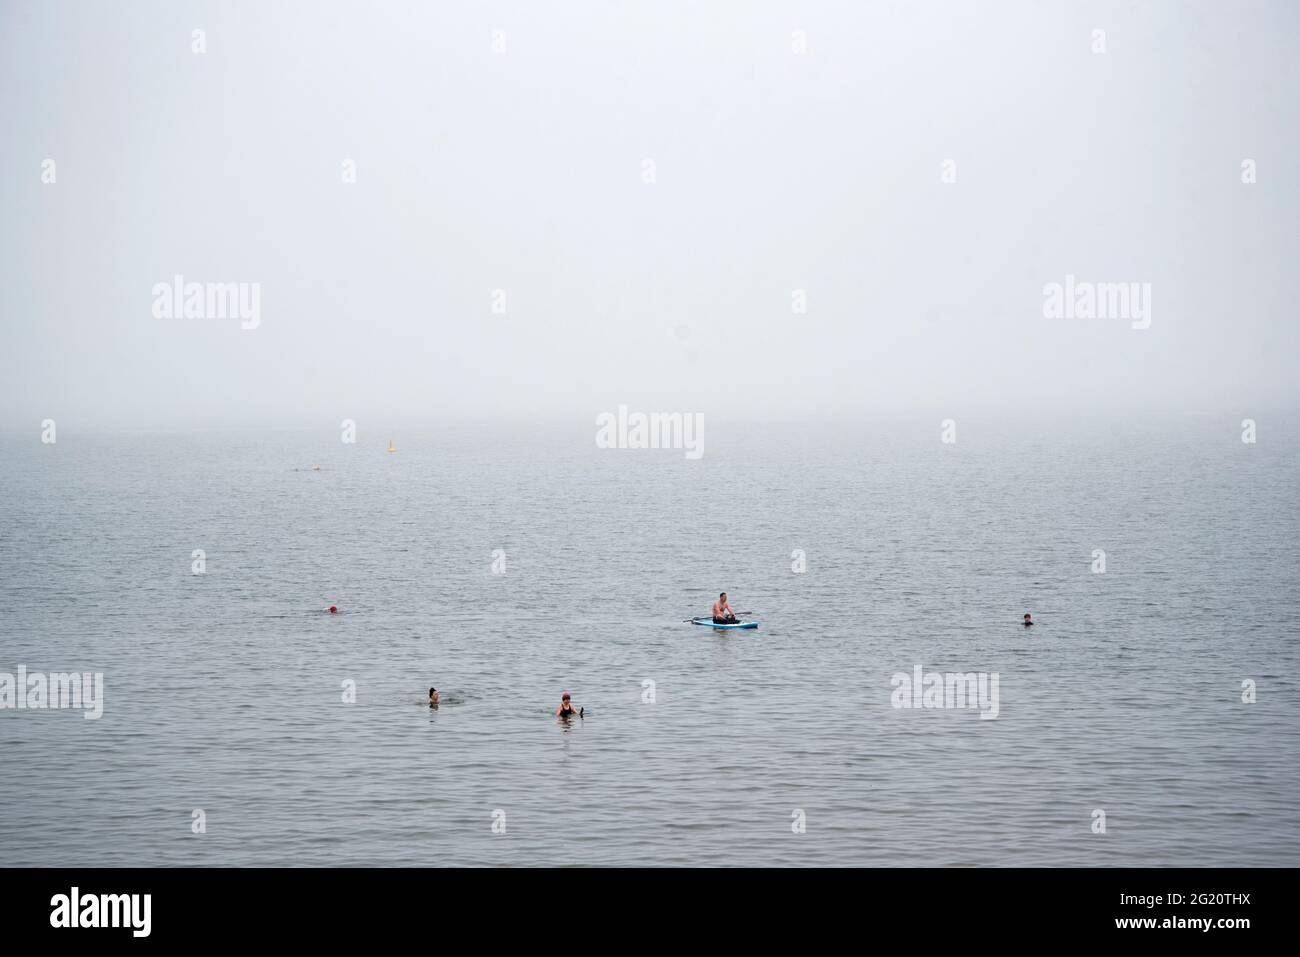 Wild swimming in the haar or sea fog at Wardie Bay on the Firth of Forth, Edinburgh, Scotland, UK. Stock Photo